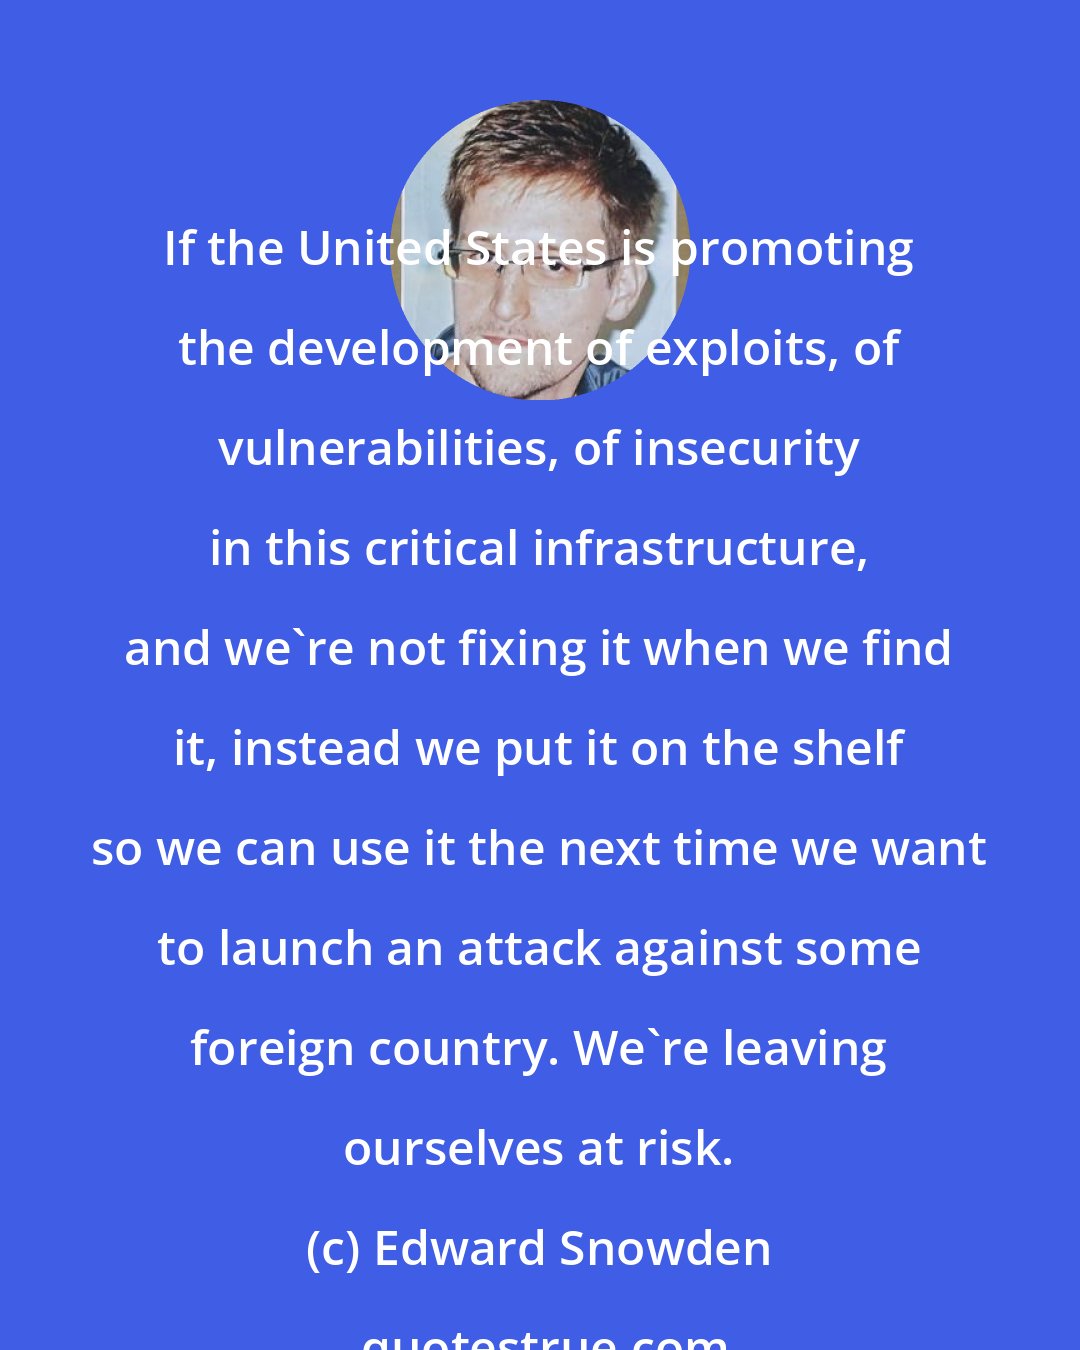 Edward Snowden: If the United States is promoting the development of exploits, of vulnerabilities, of insecurity in this critical infrastructure, and we're not fixing it when we find it, instead we put it on the shelf so we can use it the next time we want to launch an attack against some foreign country. We're leaving ourselves at risk.